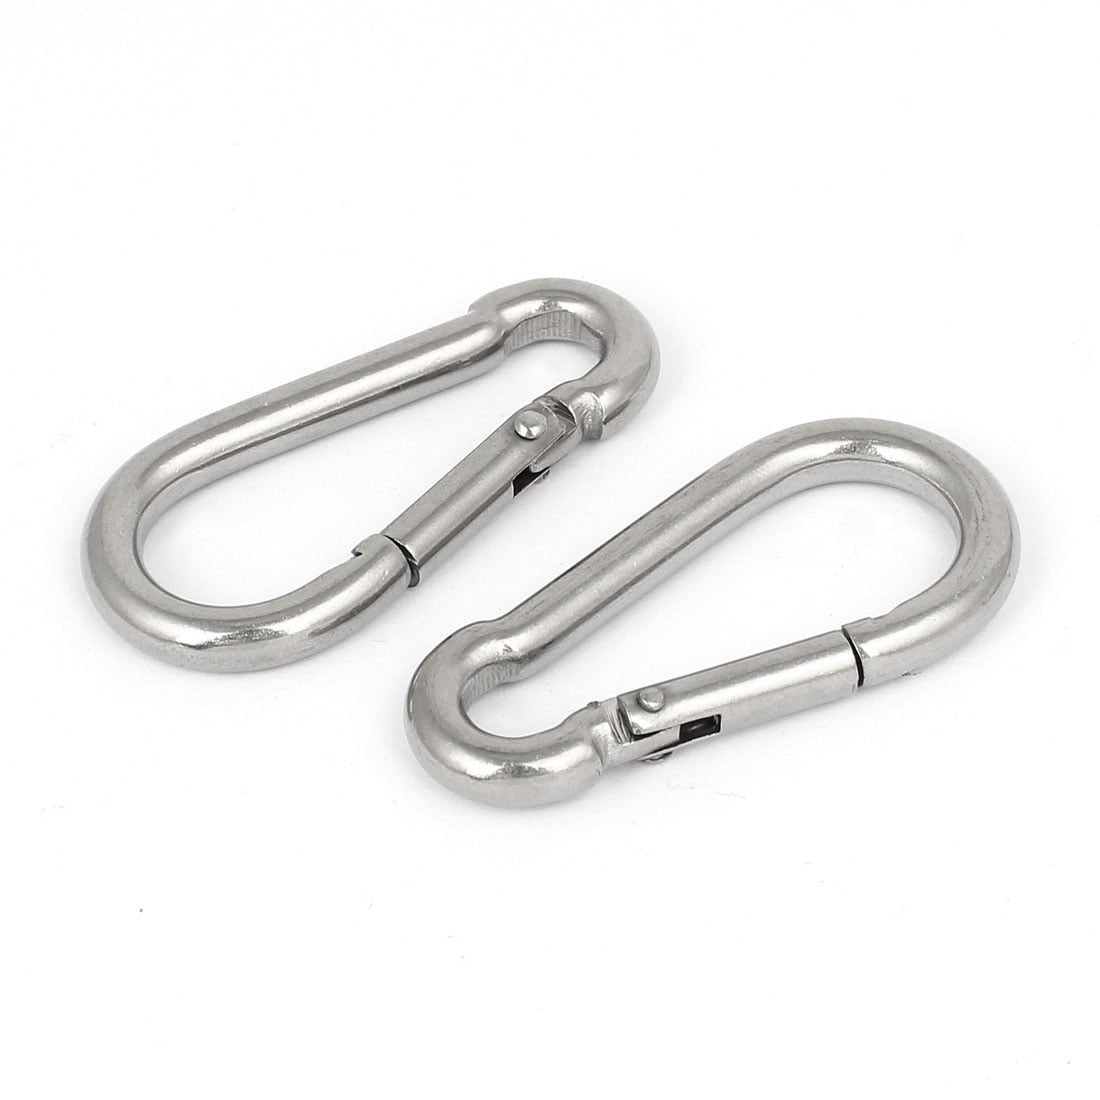 50pcs Carabiner Spring Snap Hook Clip M6 60mm 304 Stainless Steel 